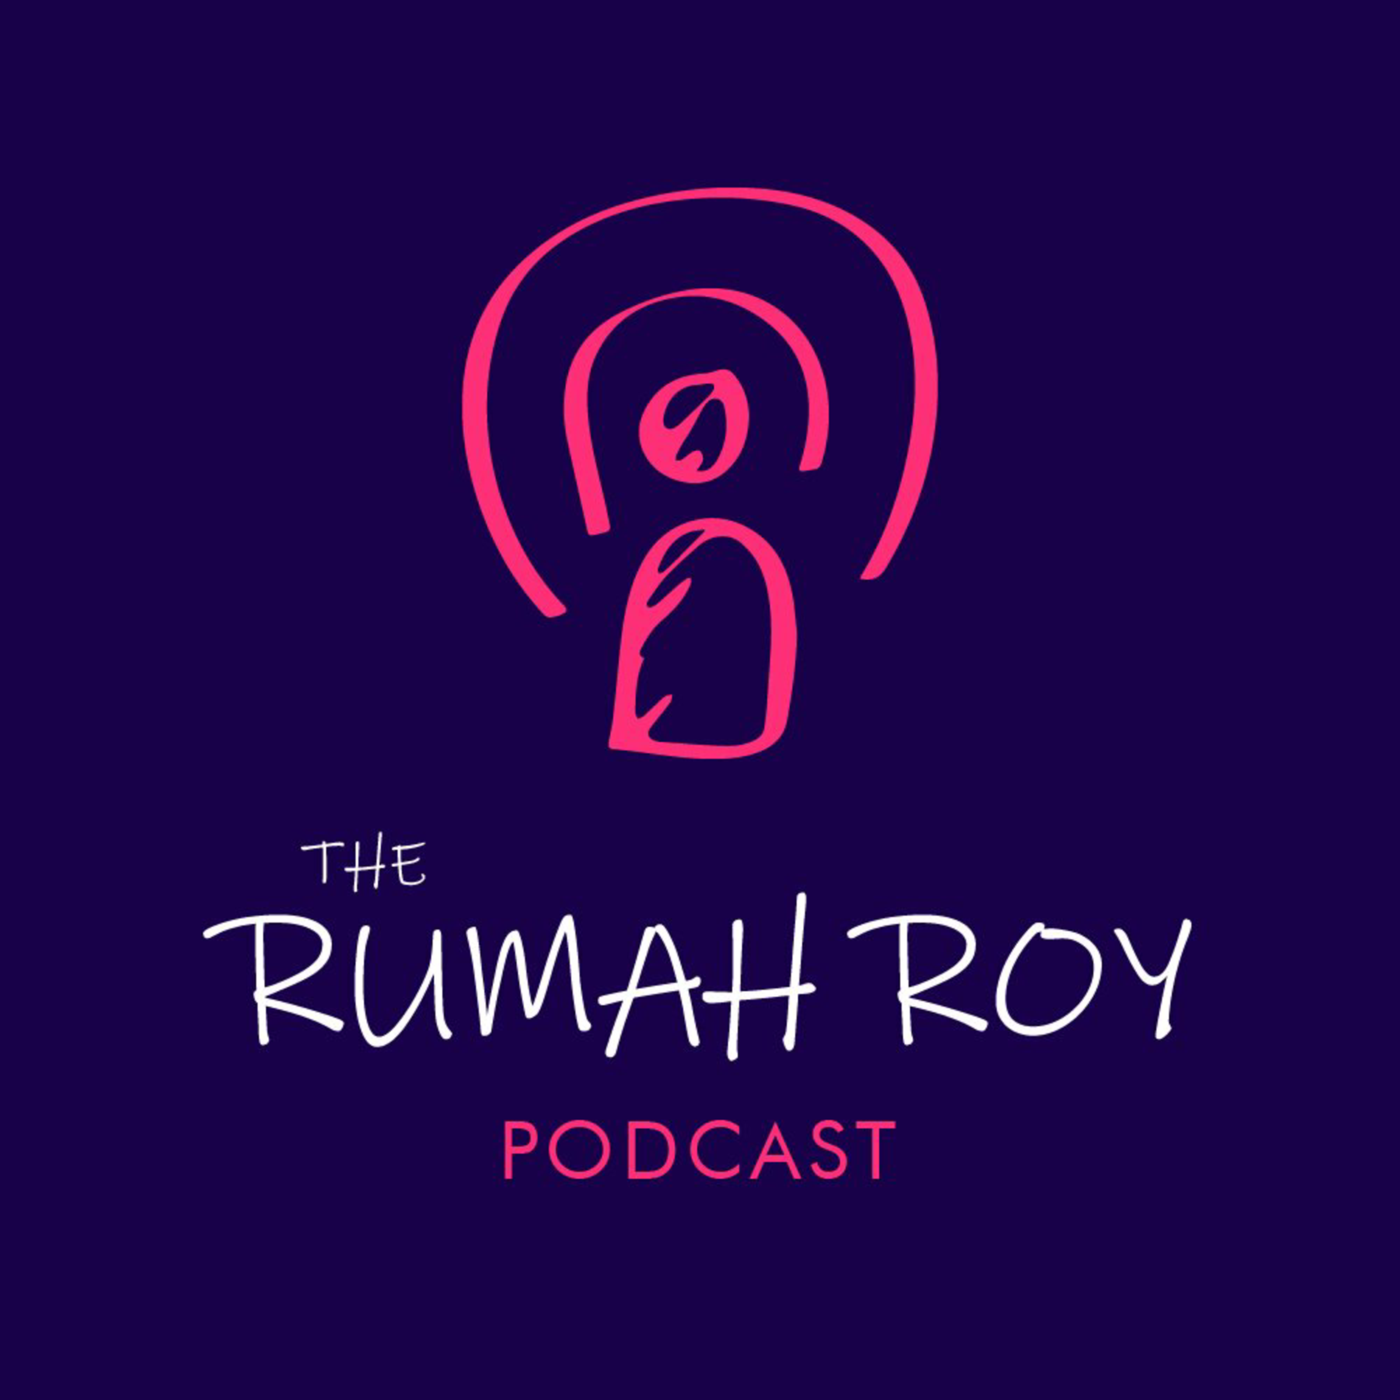 The Rumah Roy Podcast